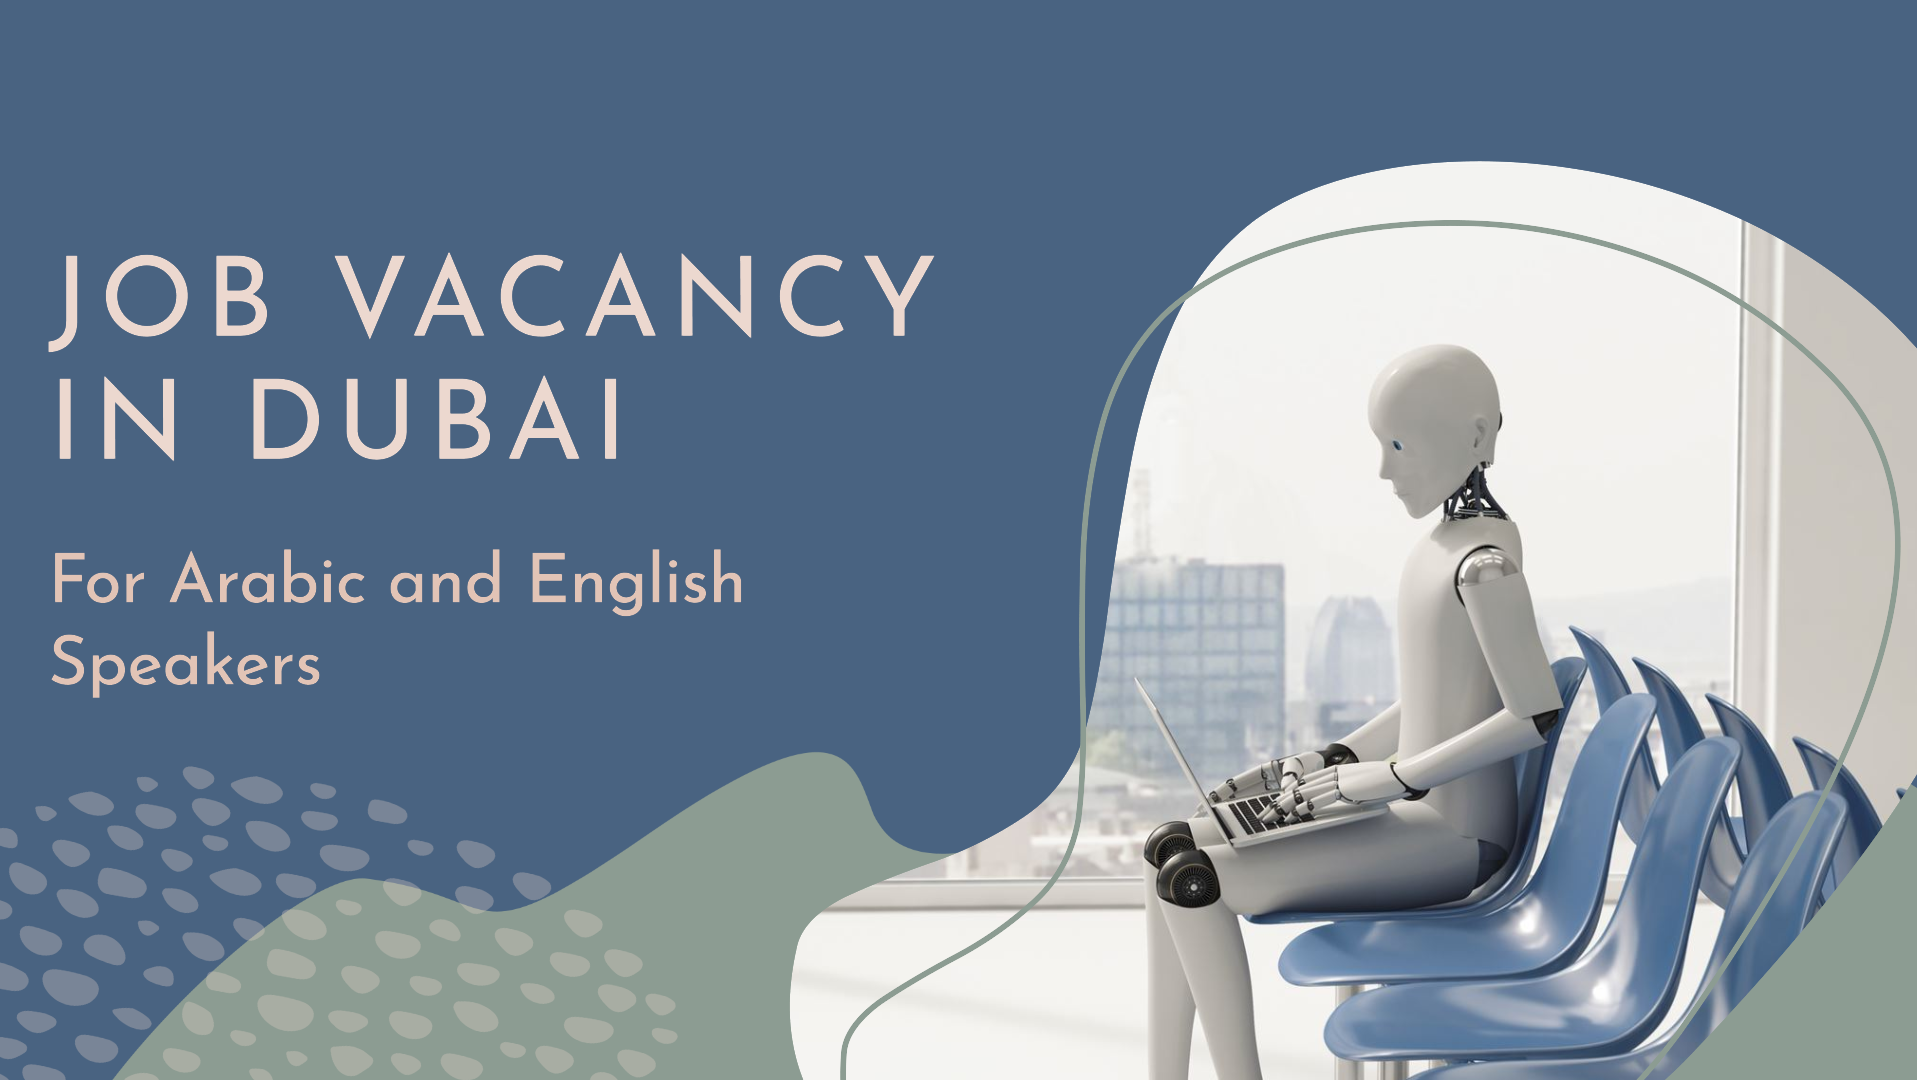 Job vacancy in Dubai for Arabic and English speakers